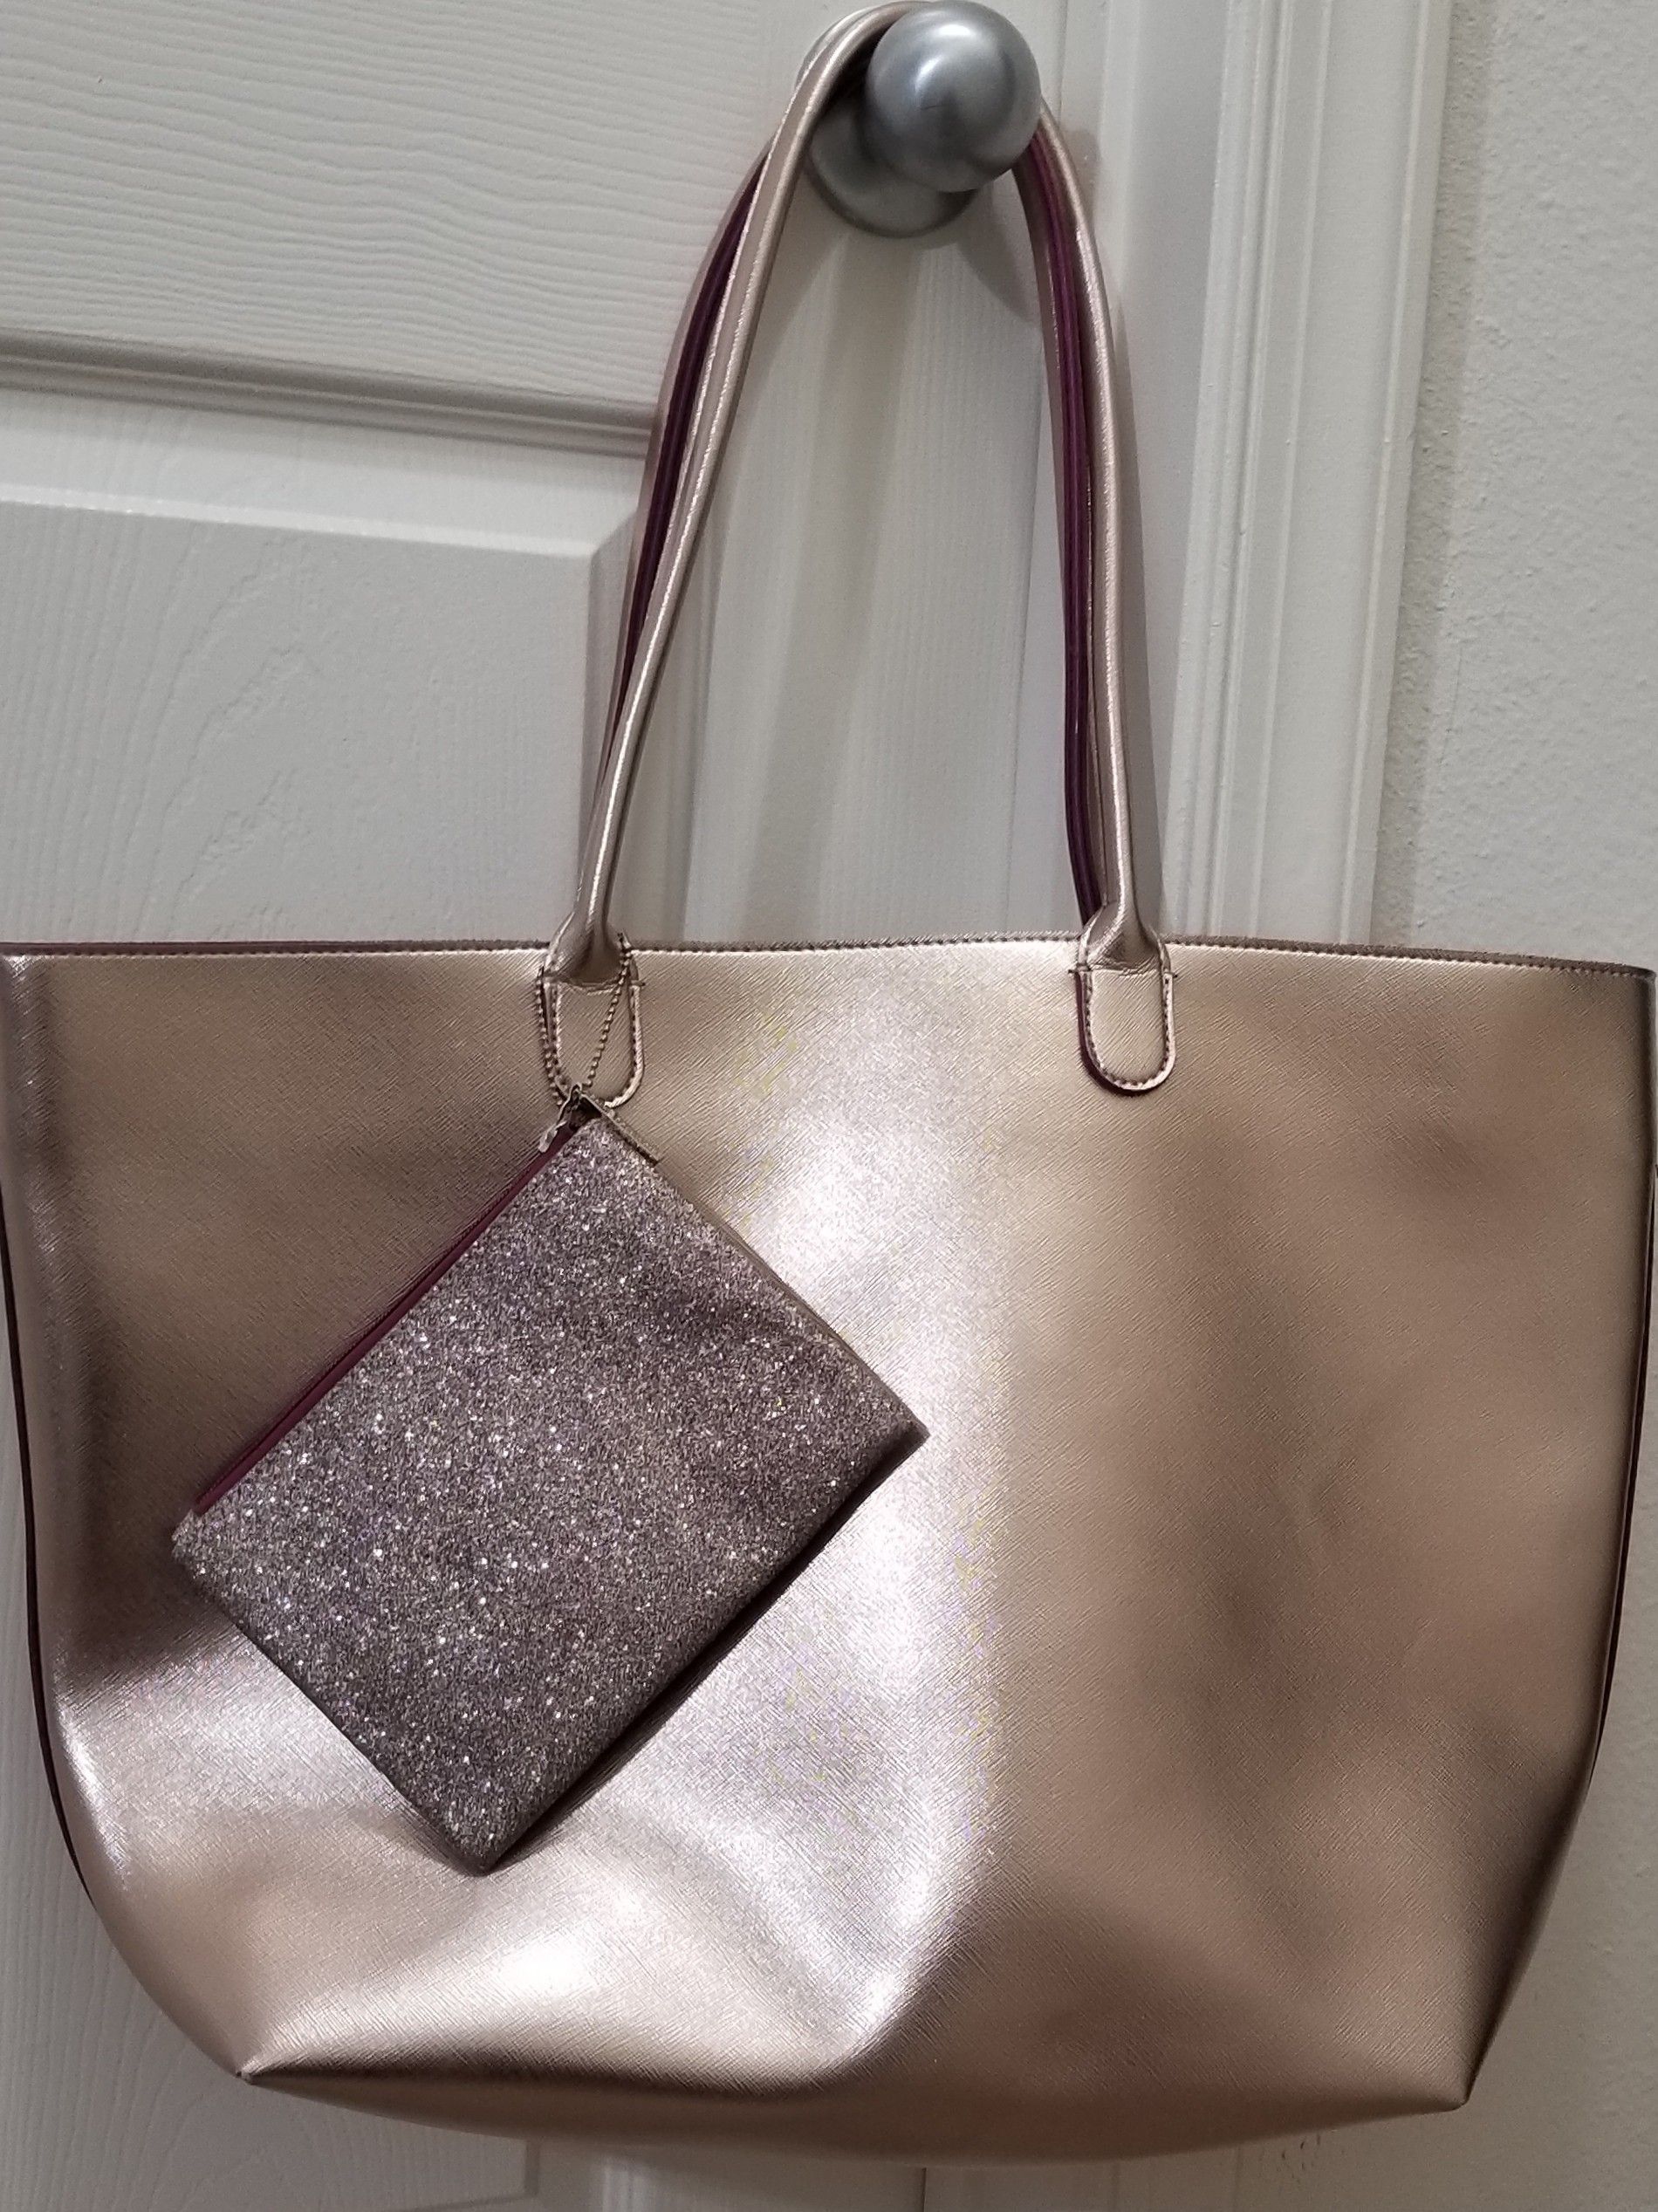 Bath & Body Works Rose Gold Tote with Glitter Wristlet